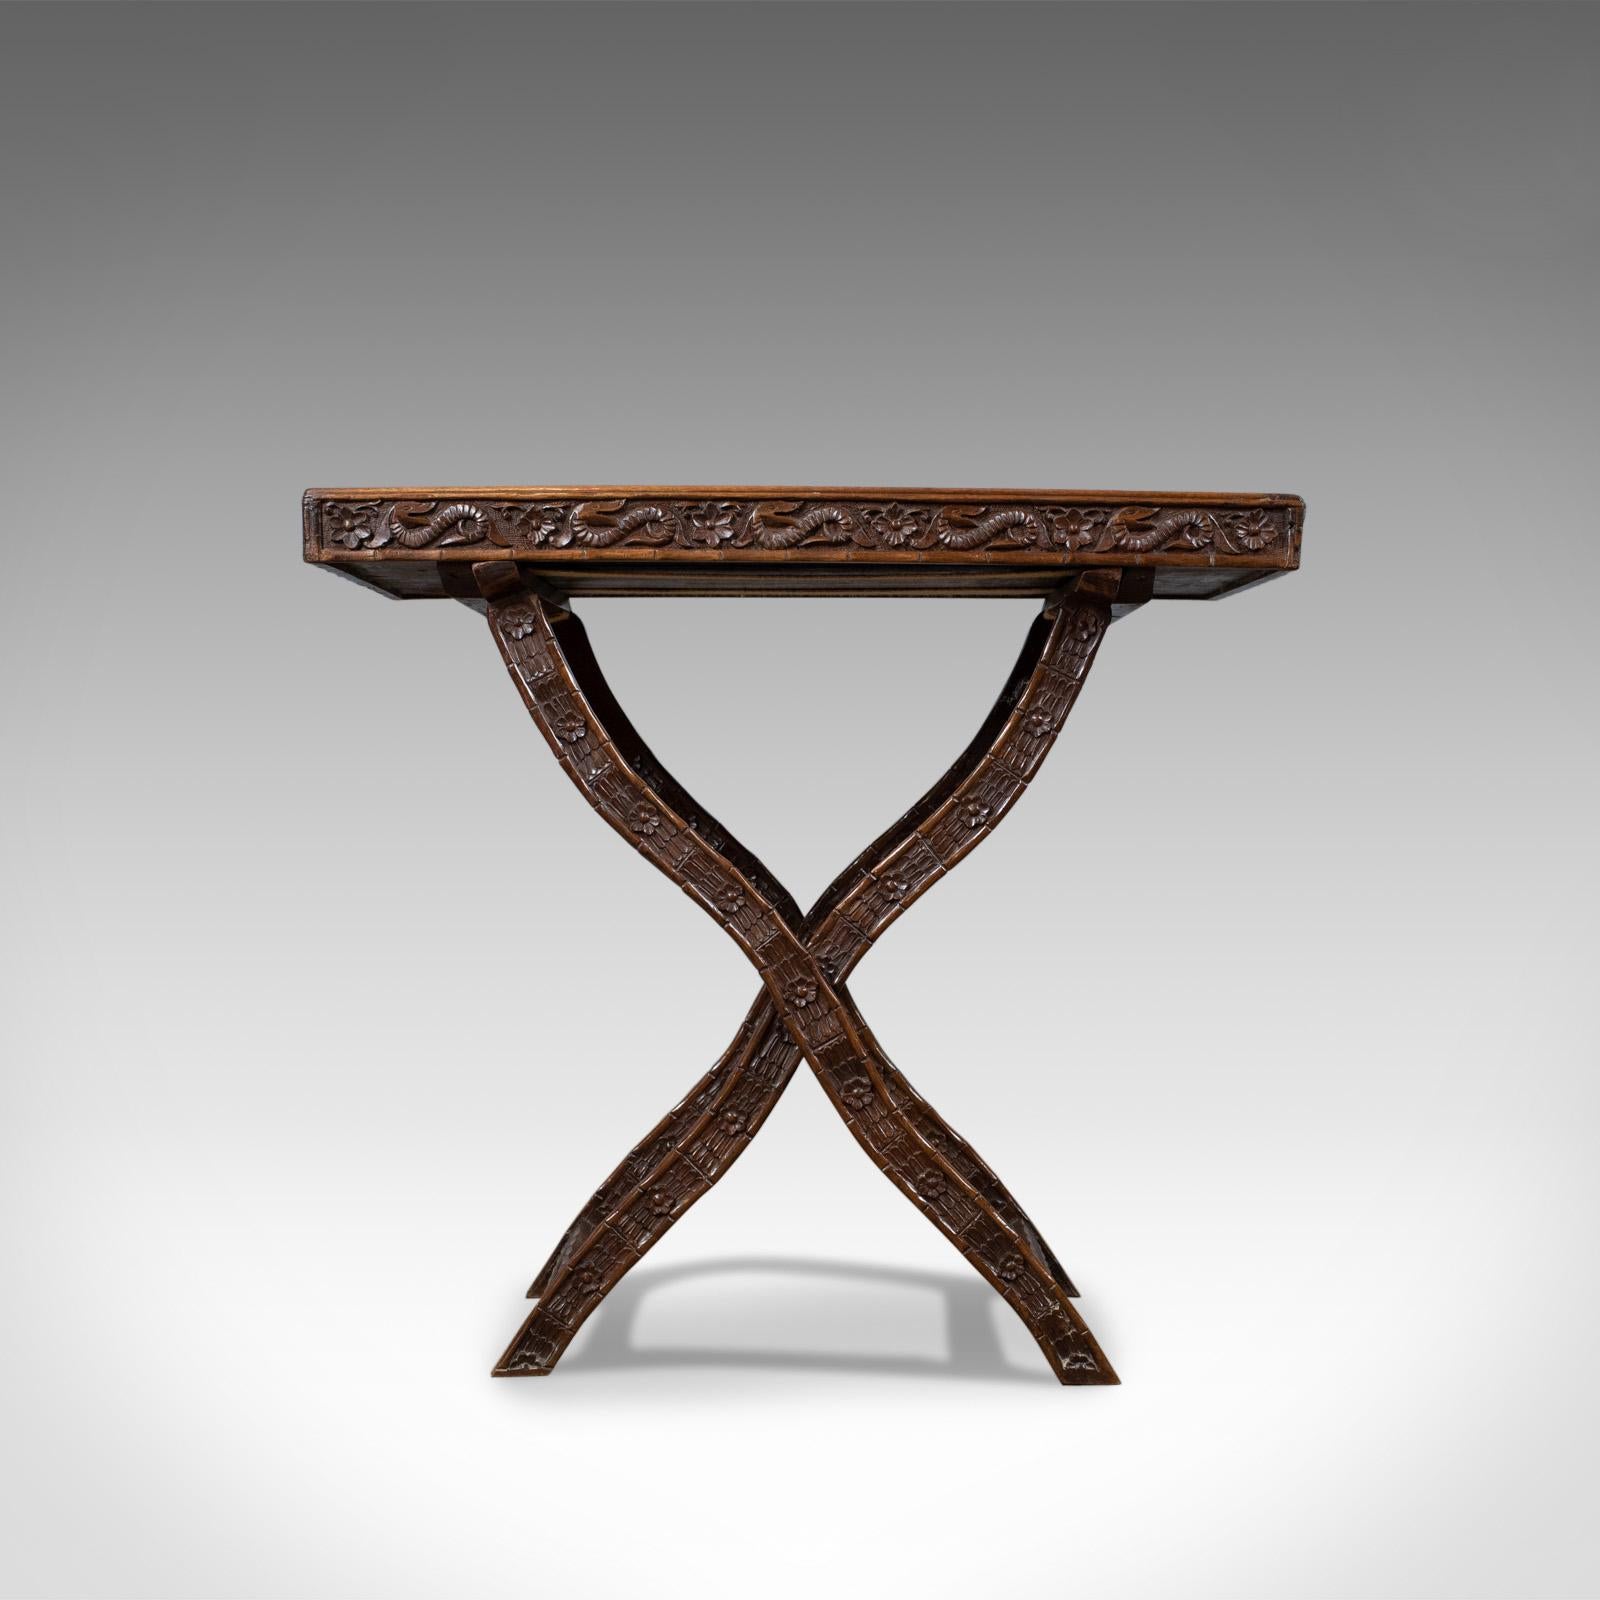 This is an antique butler's tray table, a carved oriental teak tray on folding stand dating to the early 20th century, circa 1900.

In fine order with delightful color and tone
Grain interest in the wax polished finish
Easily folds up for